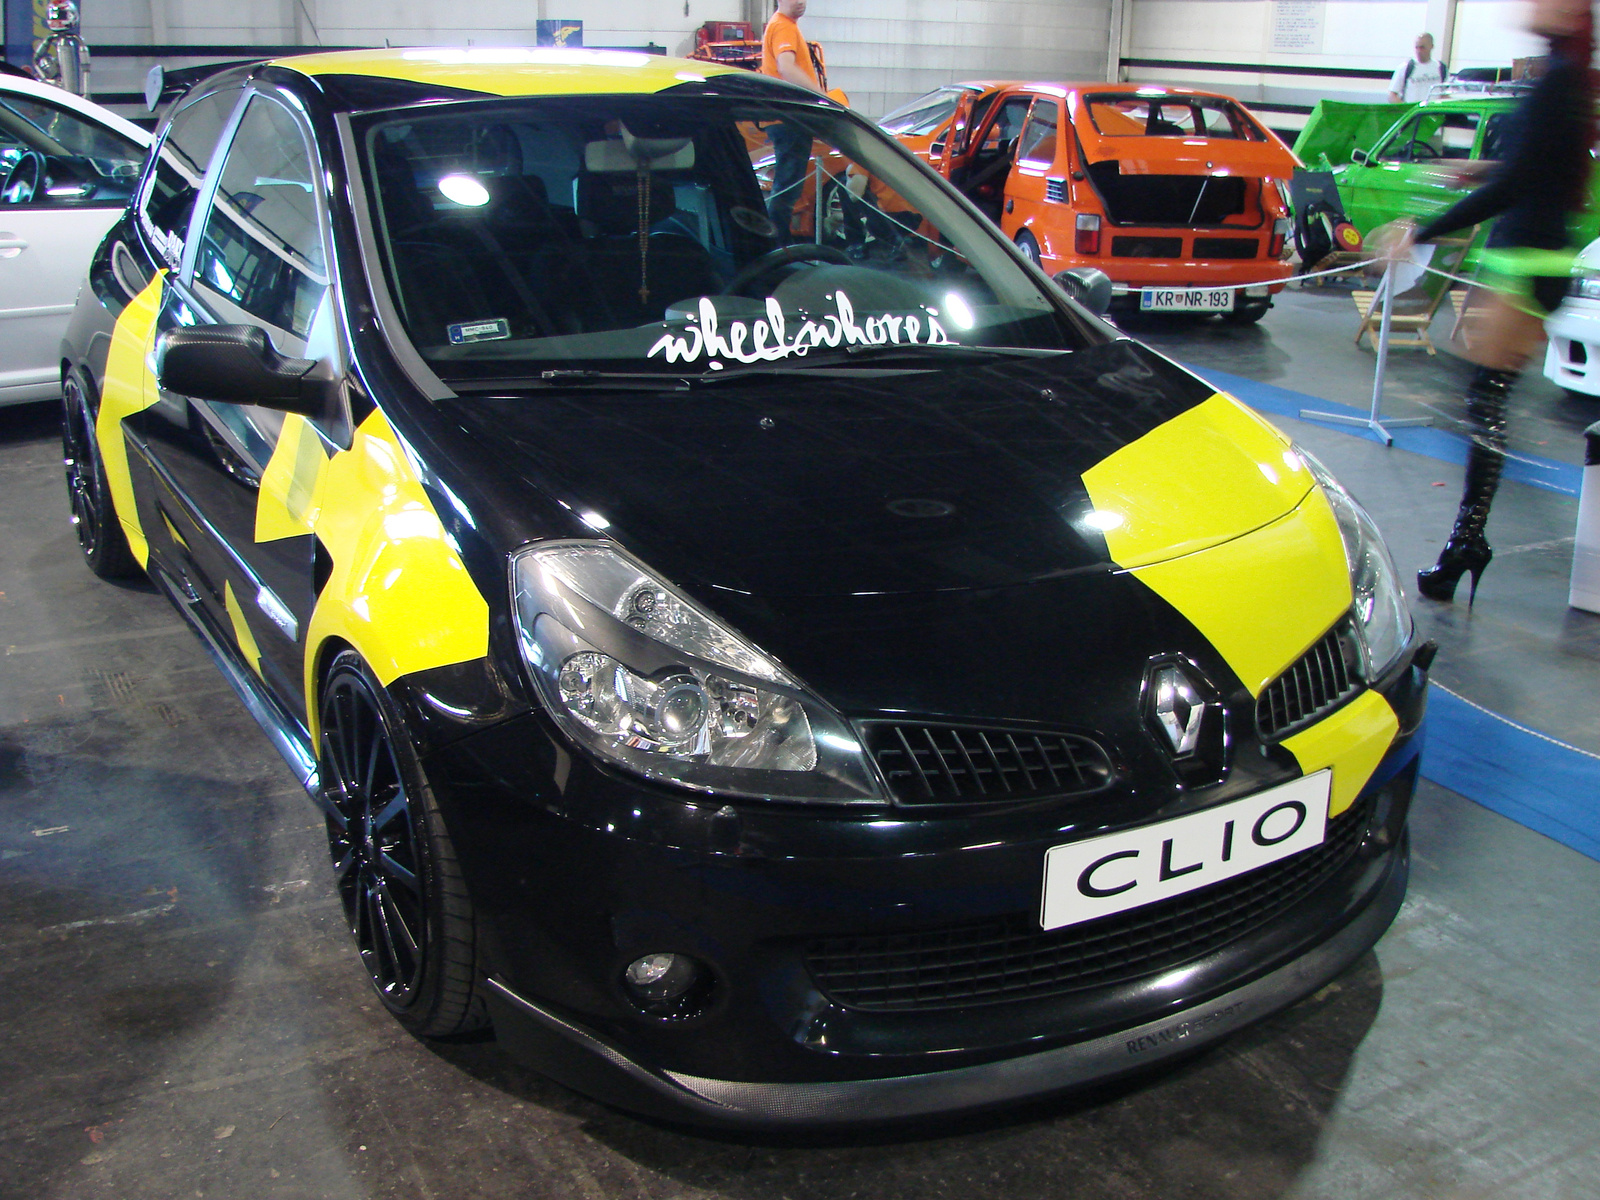 Renault Clio RS III